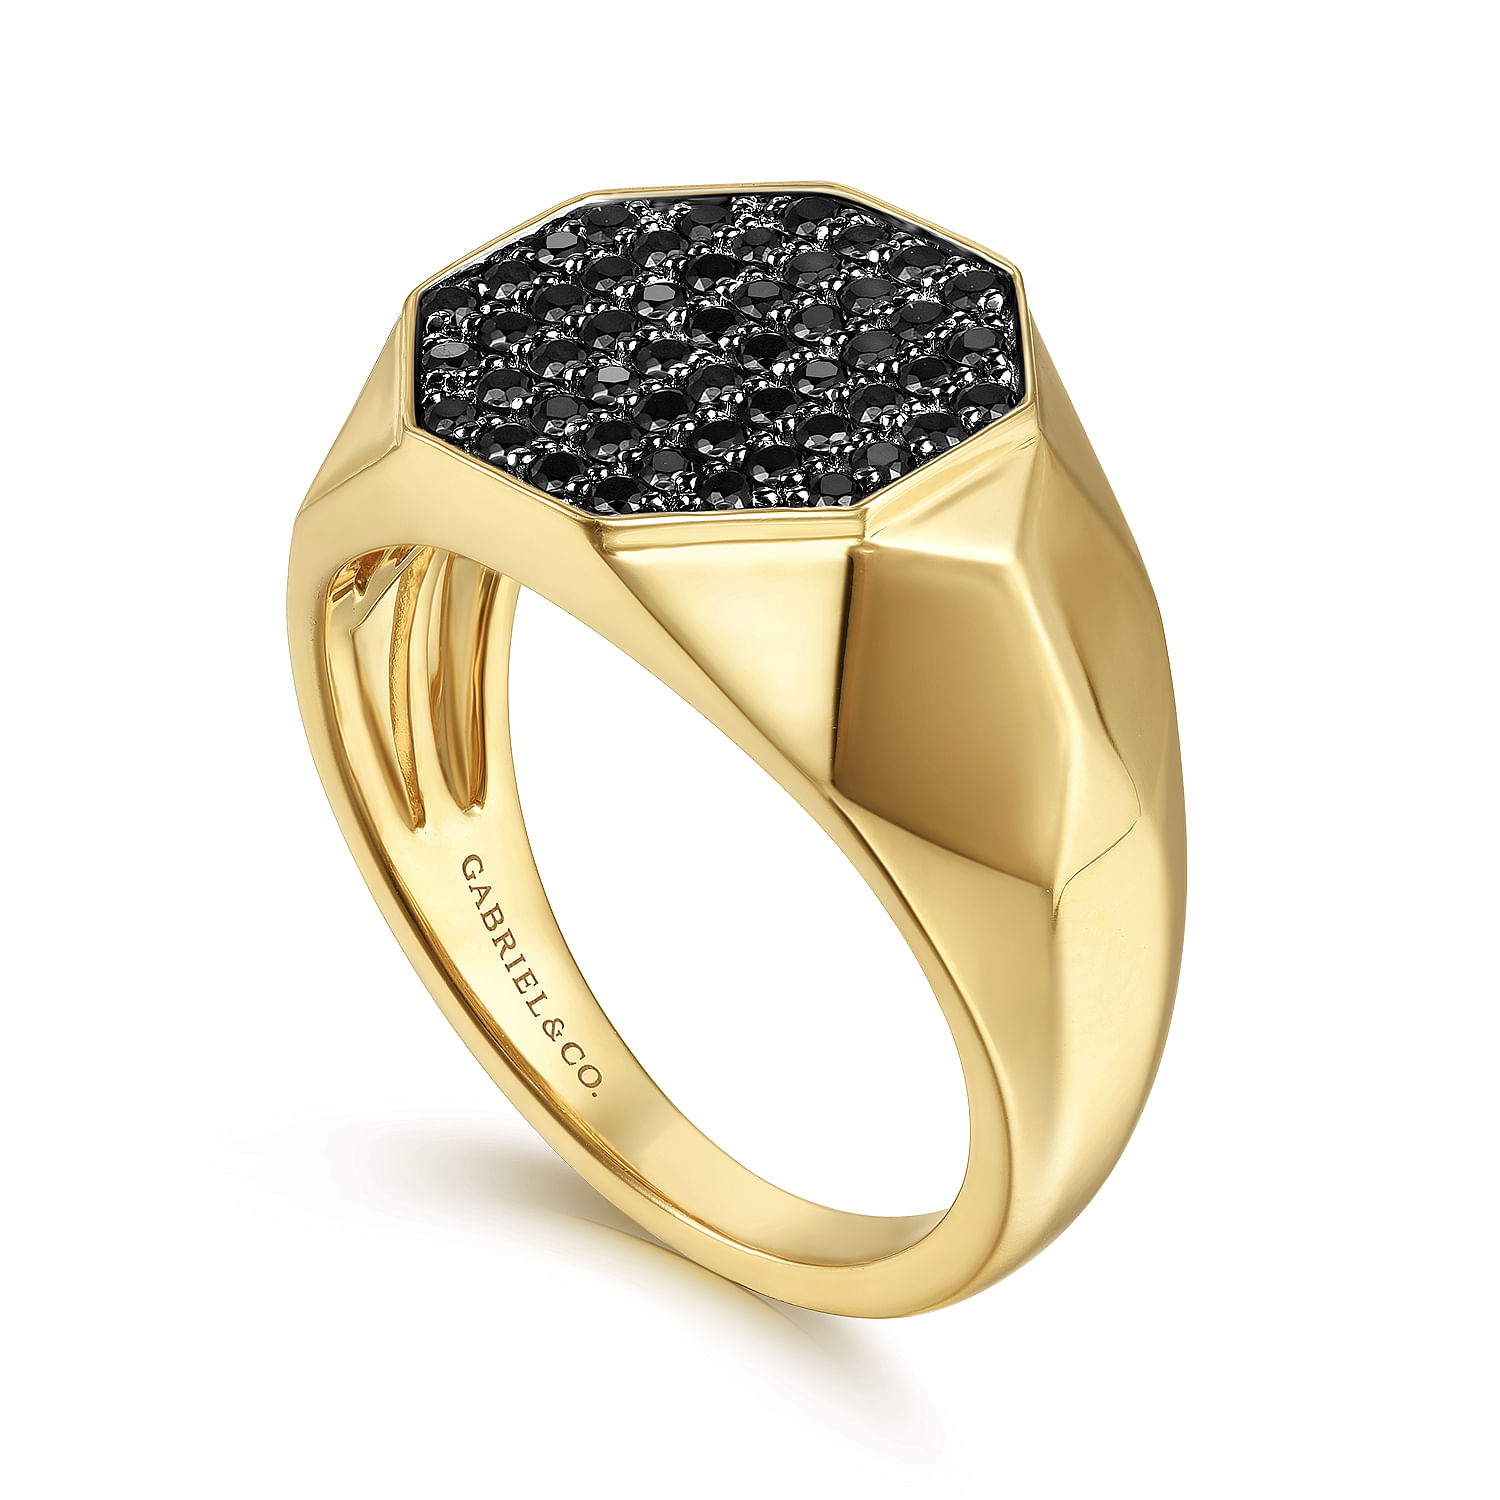 Wide 14K Yellow Gold Faceted Signet Ring with Black Diamond Pavé in High Polished Finish